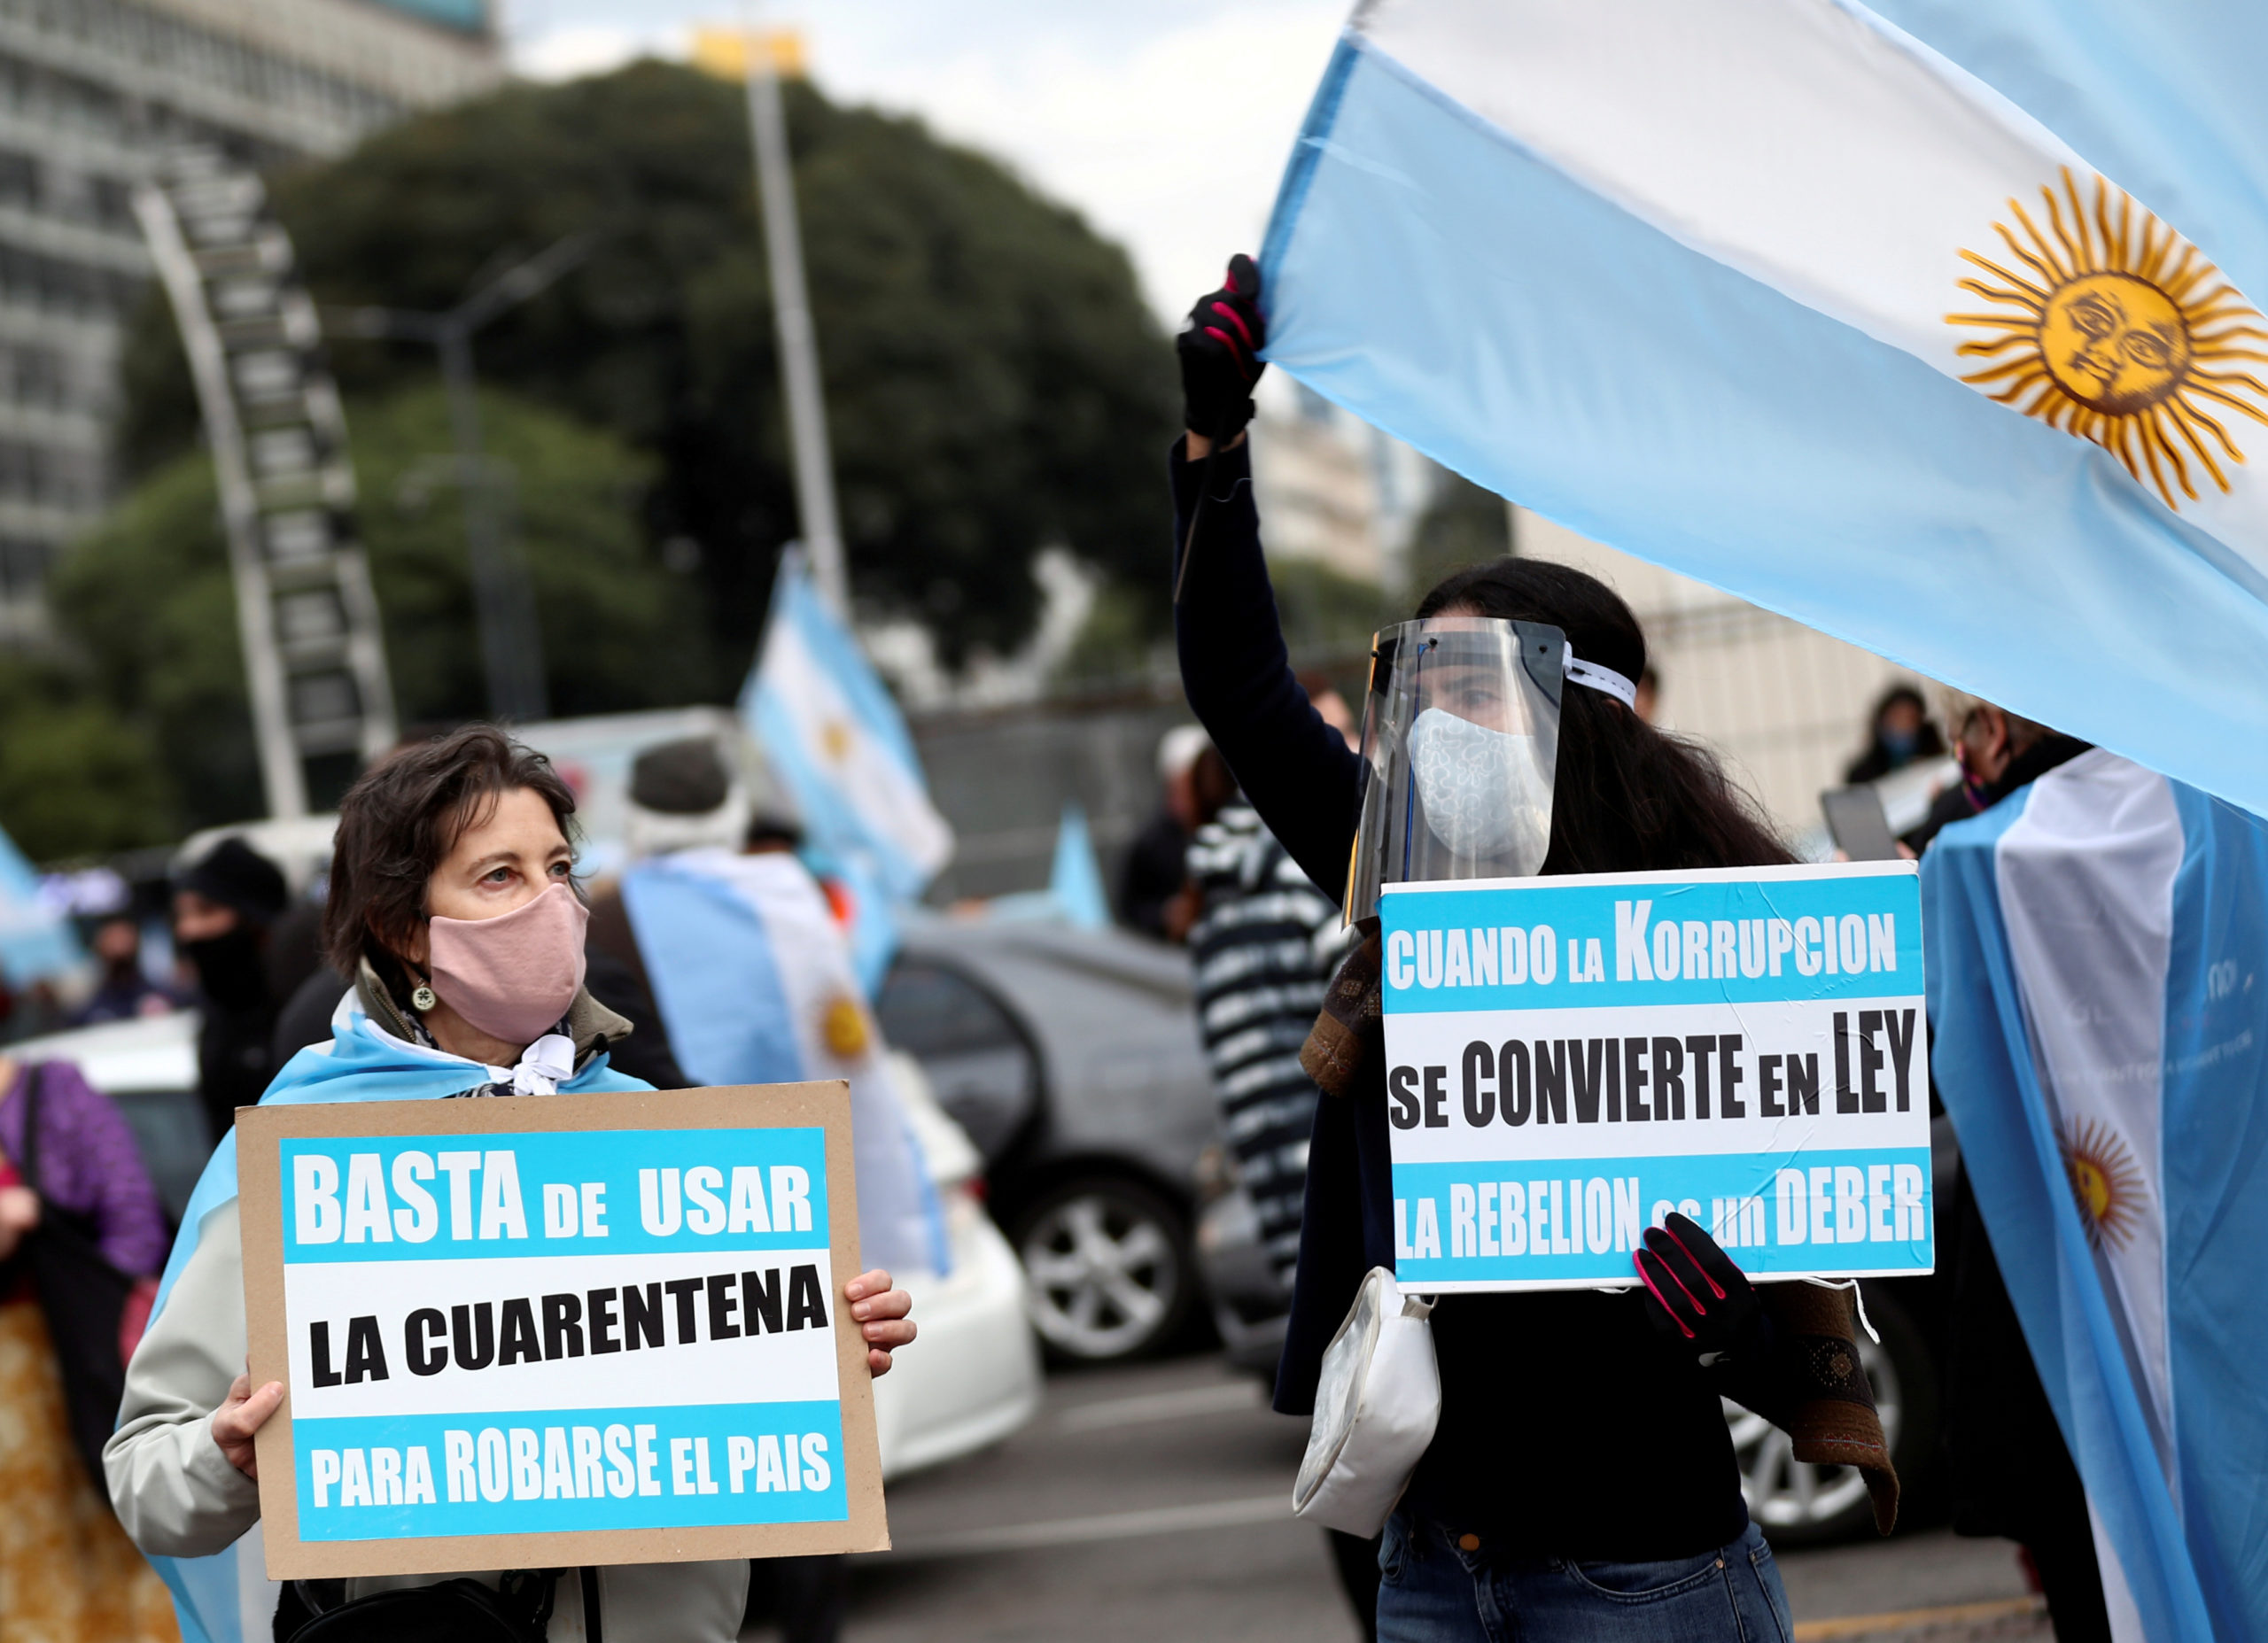 Protest in Argentina against the tightening of sanitary restrictions